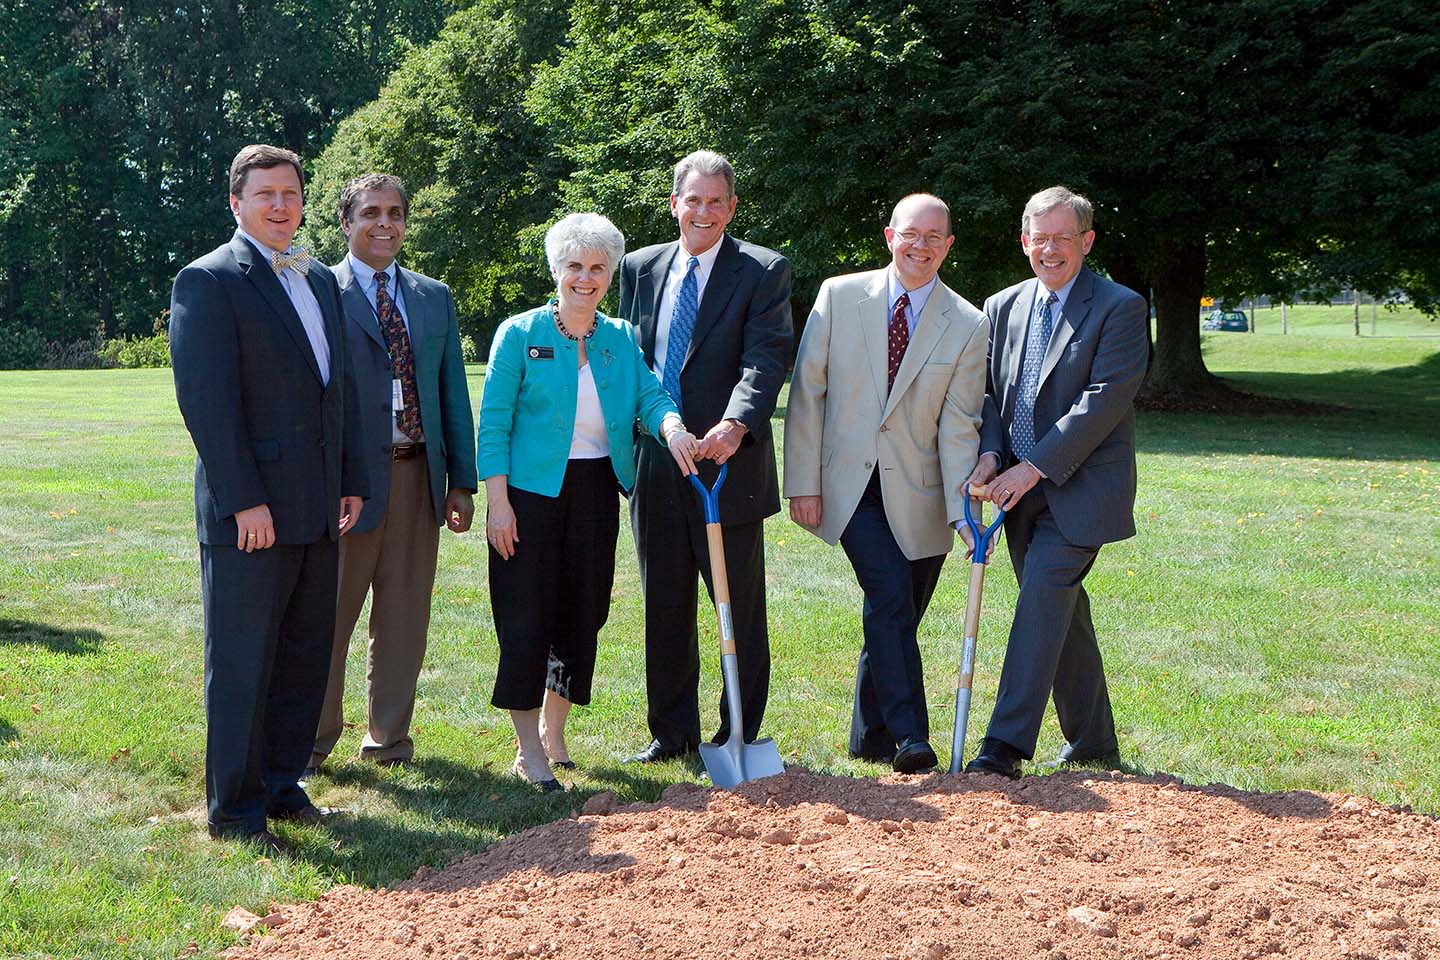 William McBeath of Morgan Gick McBeath Associates; APL Technical Services Department Head Mohammad Dehghani; Howard County Councilwoman Mary Kay Sigaty; Michael Harvey of Harvey-Cleary Builders; APL Space Department Head John Sommerer, and APL Director Richard Roca